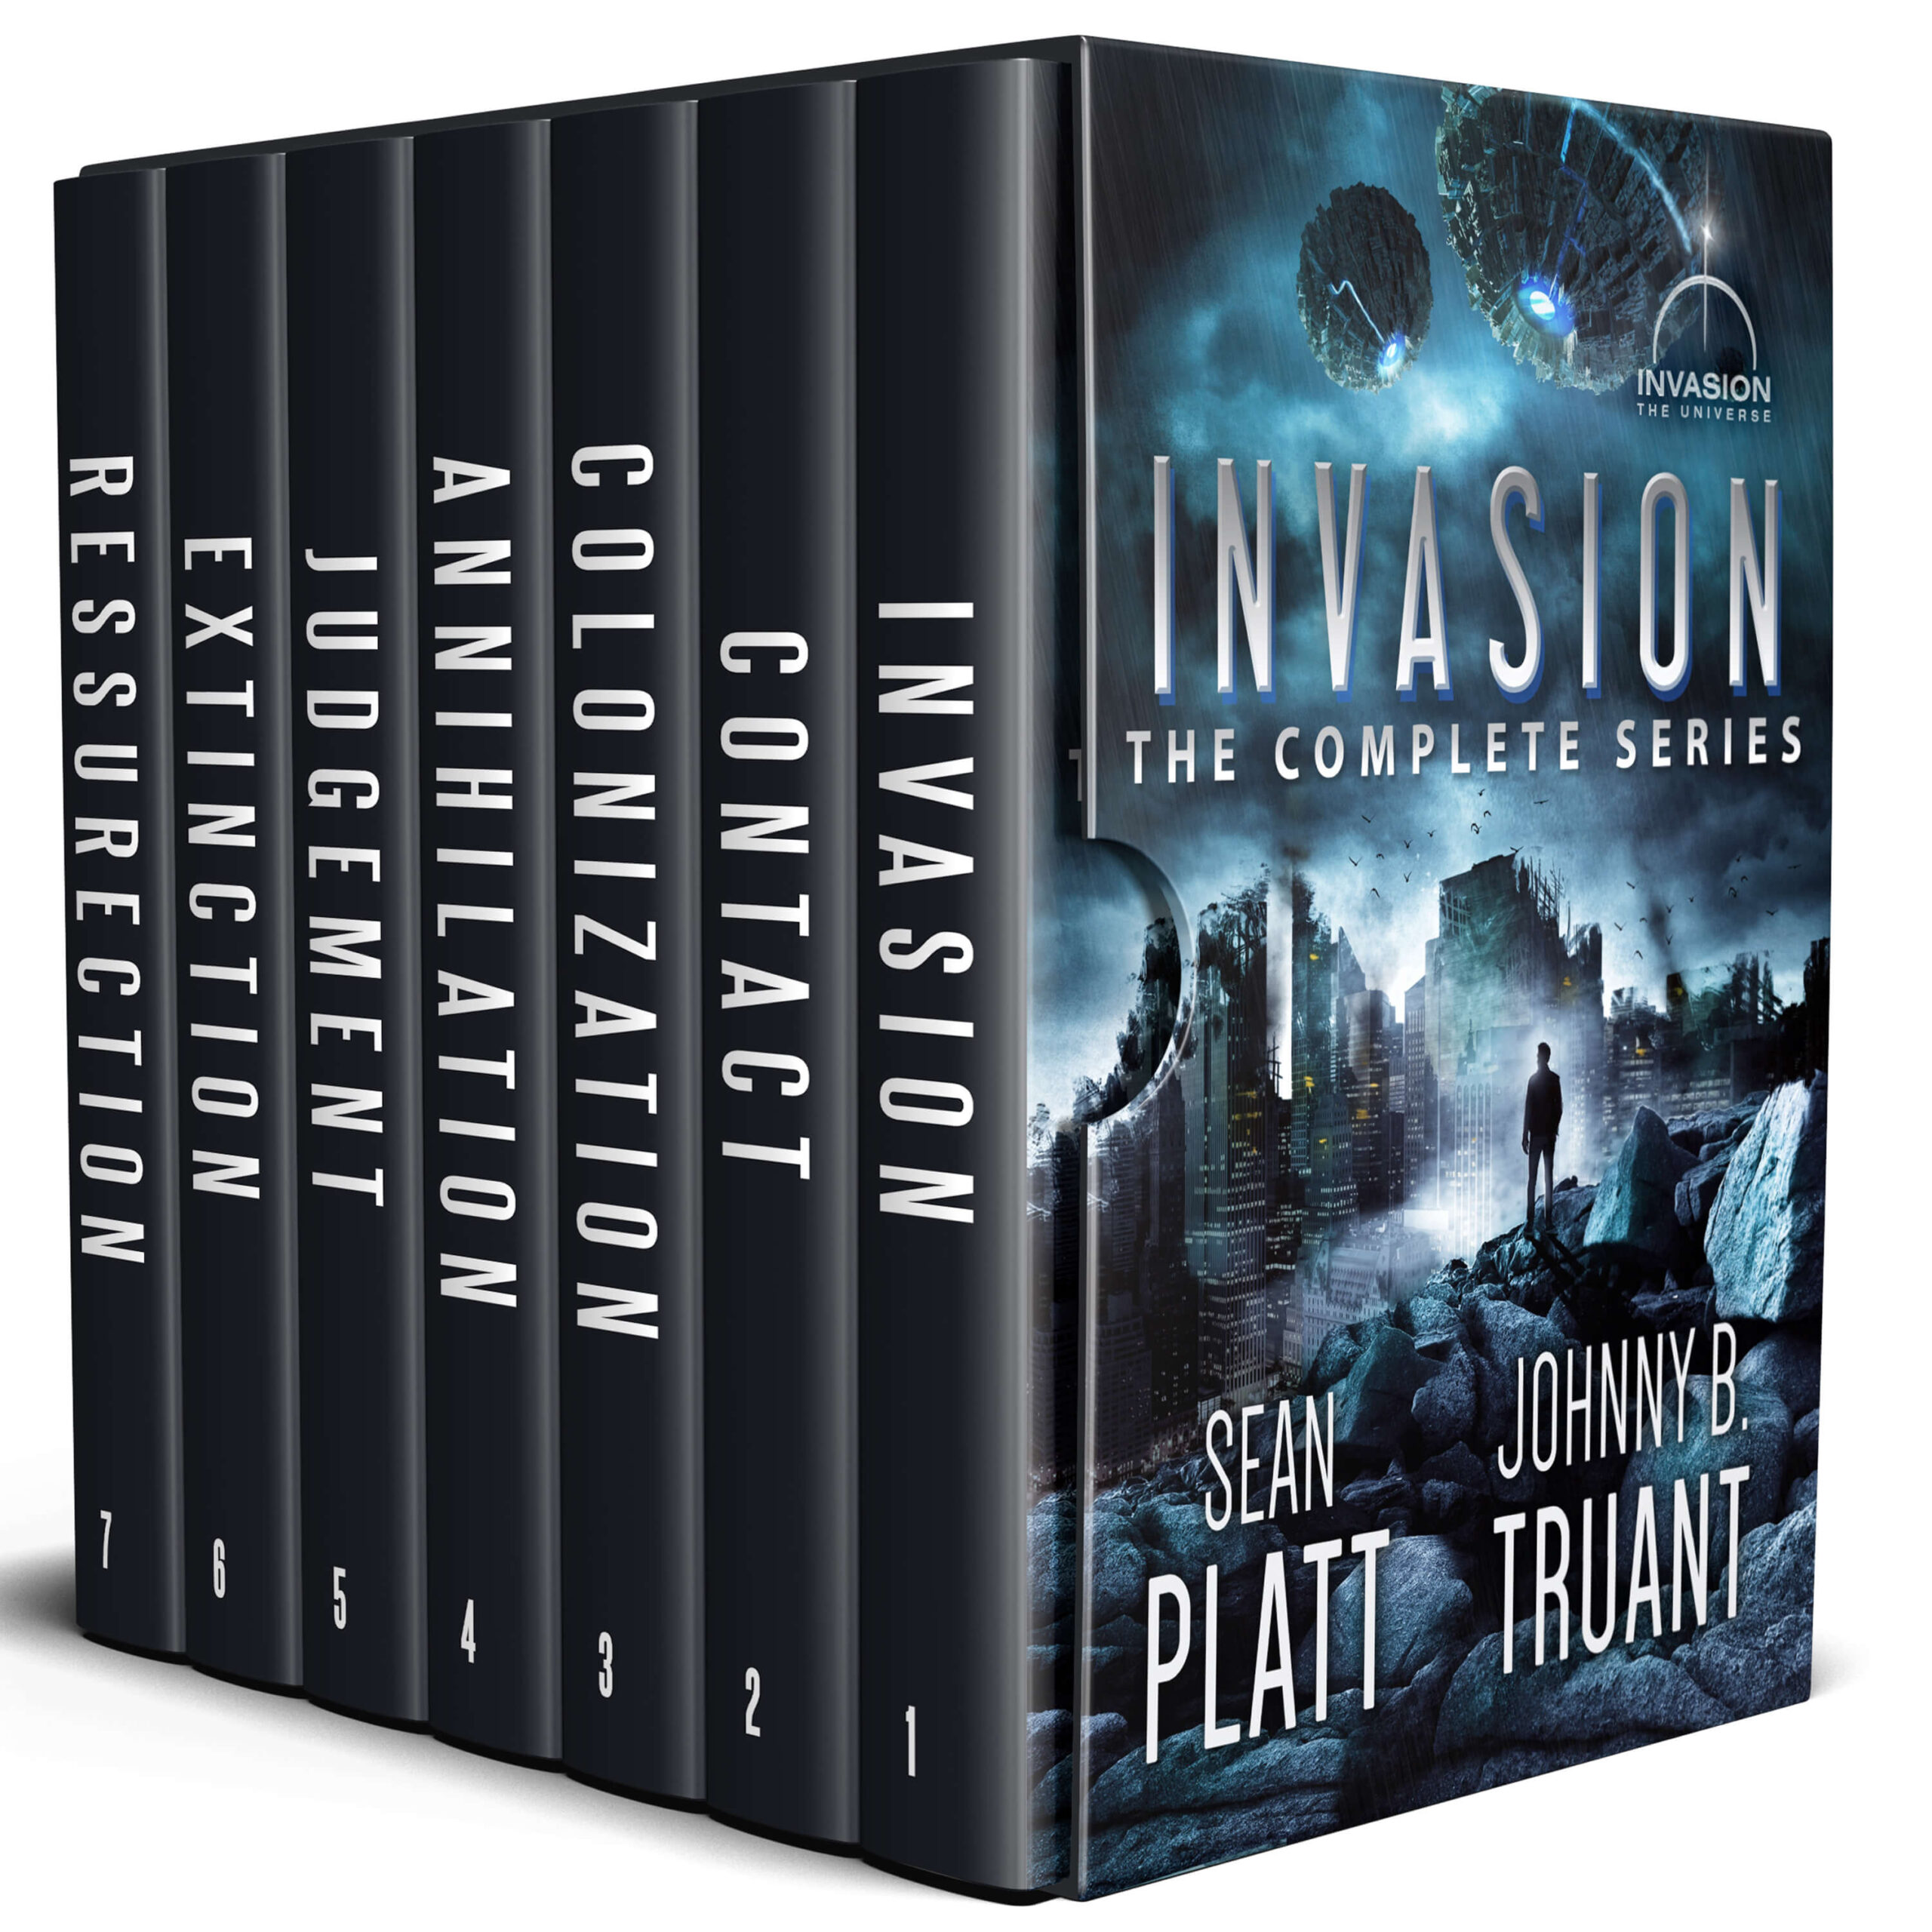 FREE: Invasion: The Complete Series by Avery Blake and Johnny B. Truant